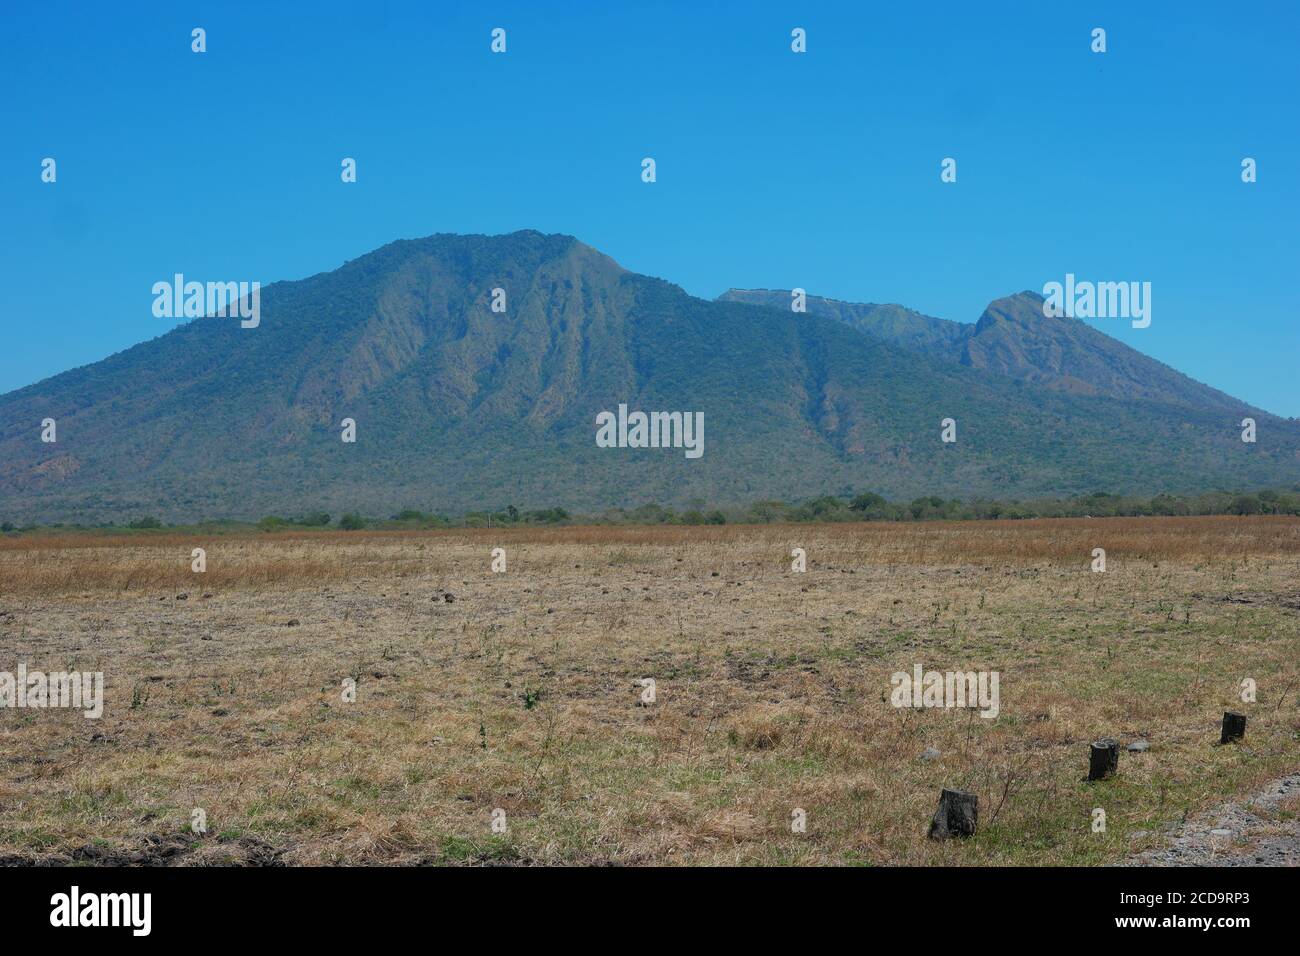 Scenic shot of Mount Baluran from Baluran National Park in Java, Indonesia Stock Photo